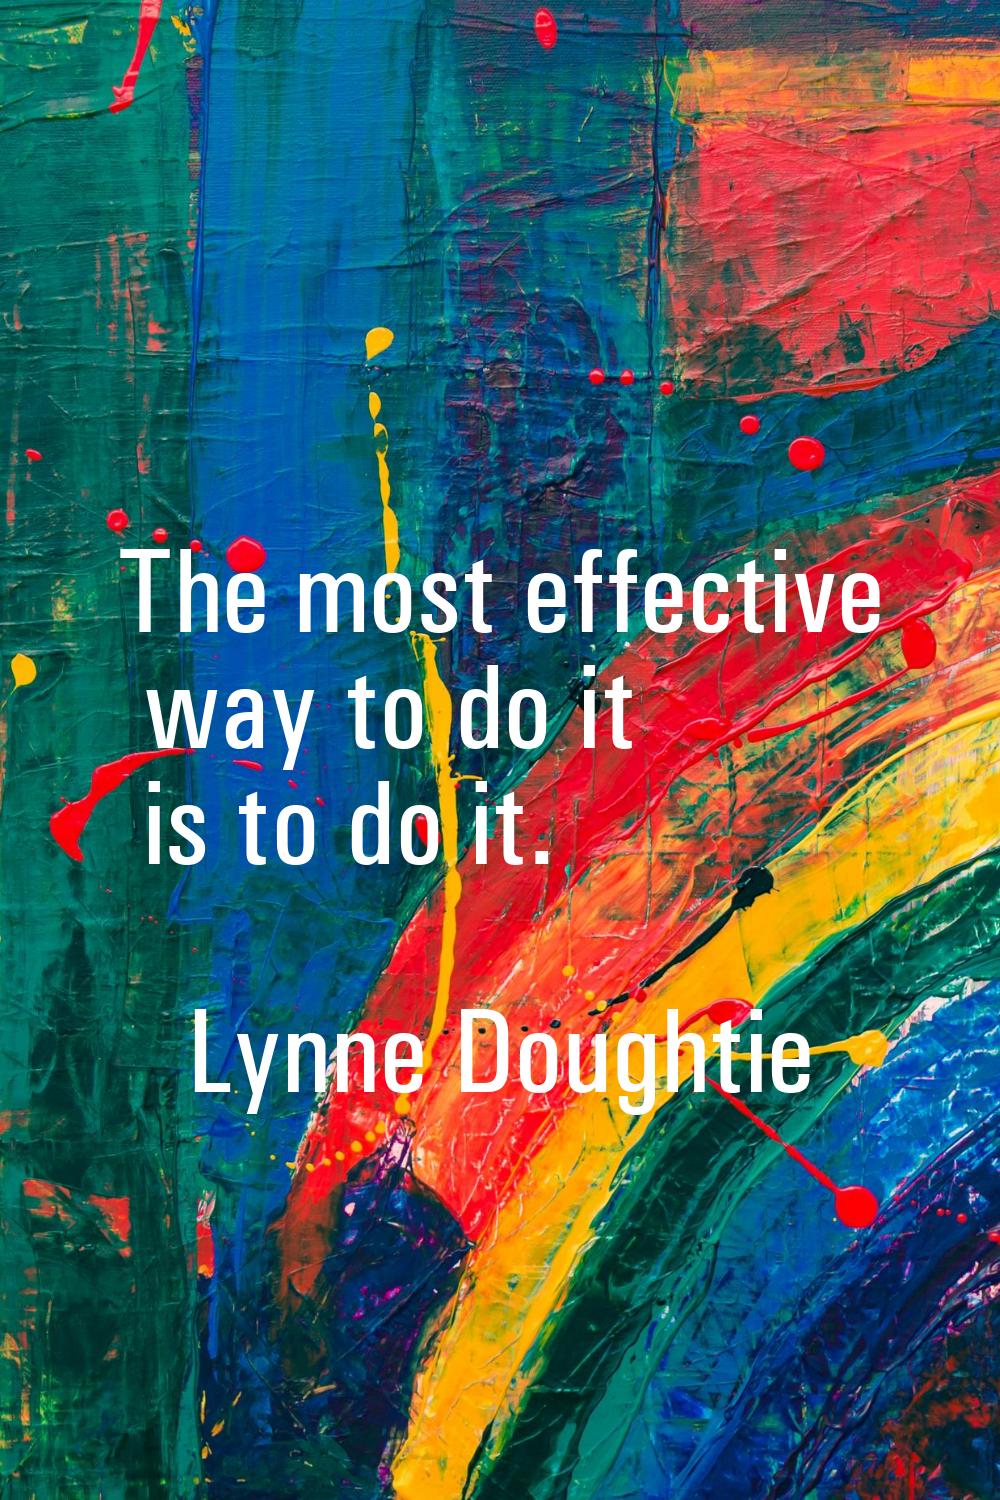 The most effective way to do it is to do it.